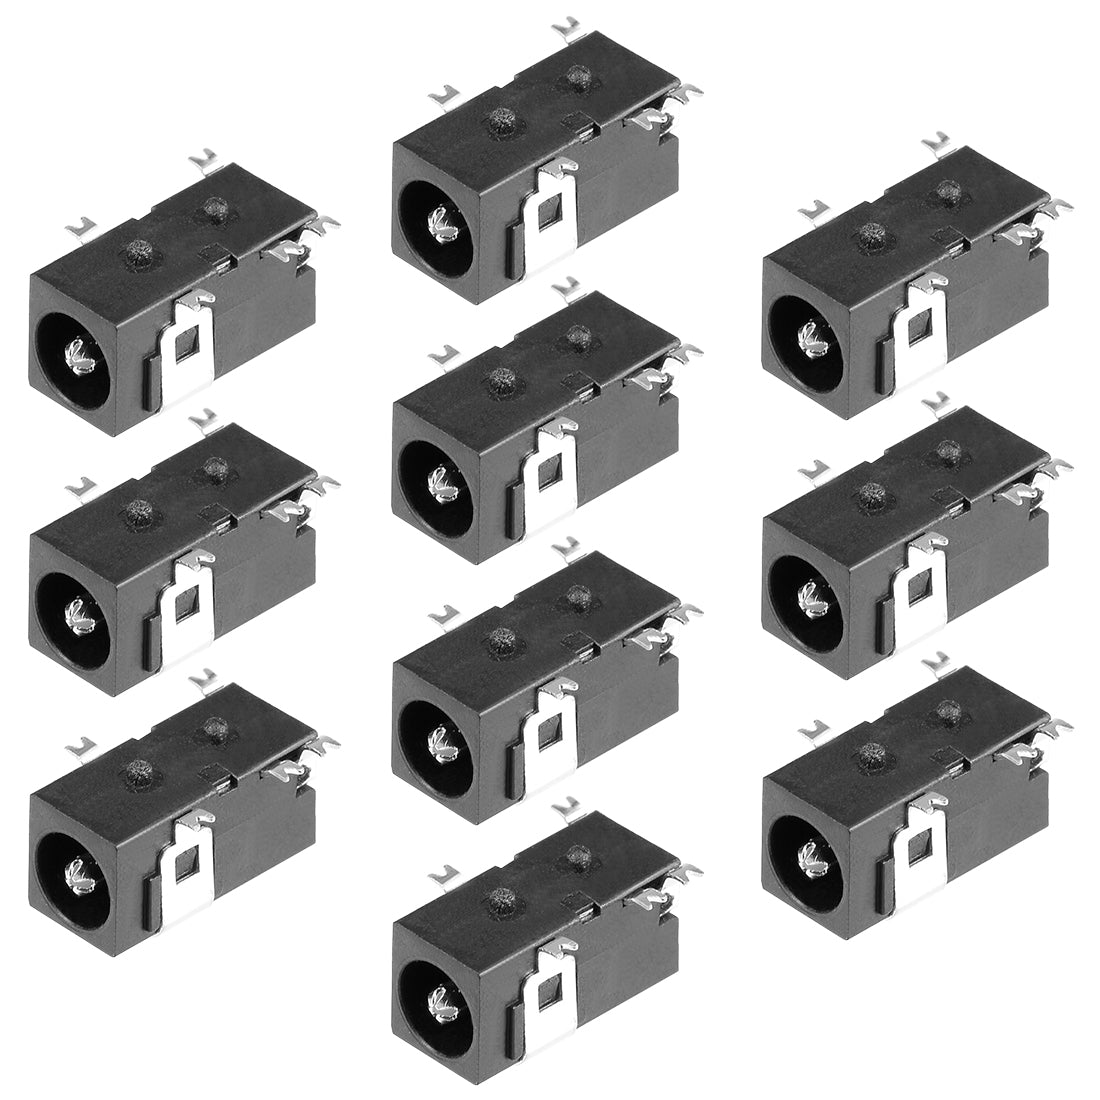 uxcell Uxcell PCB Mount 4.0mm x 1.7mm 5 Pin Audio Video DC Power Connector Socket DC098 Black 10Pcs